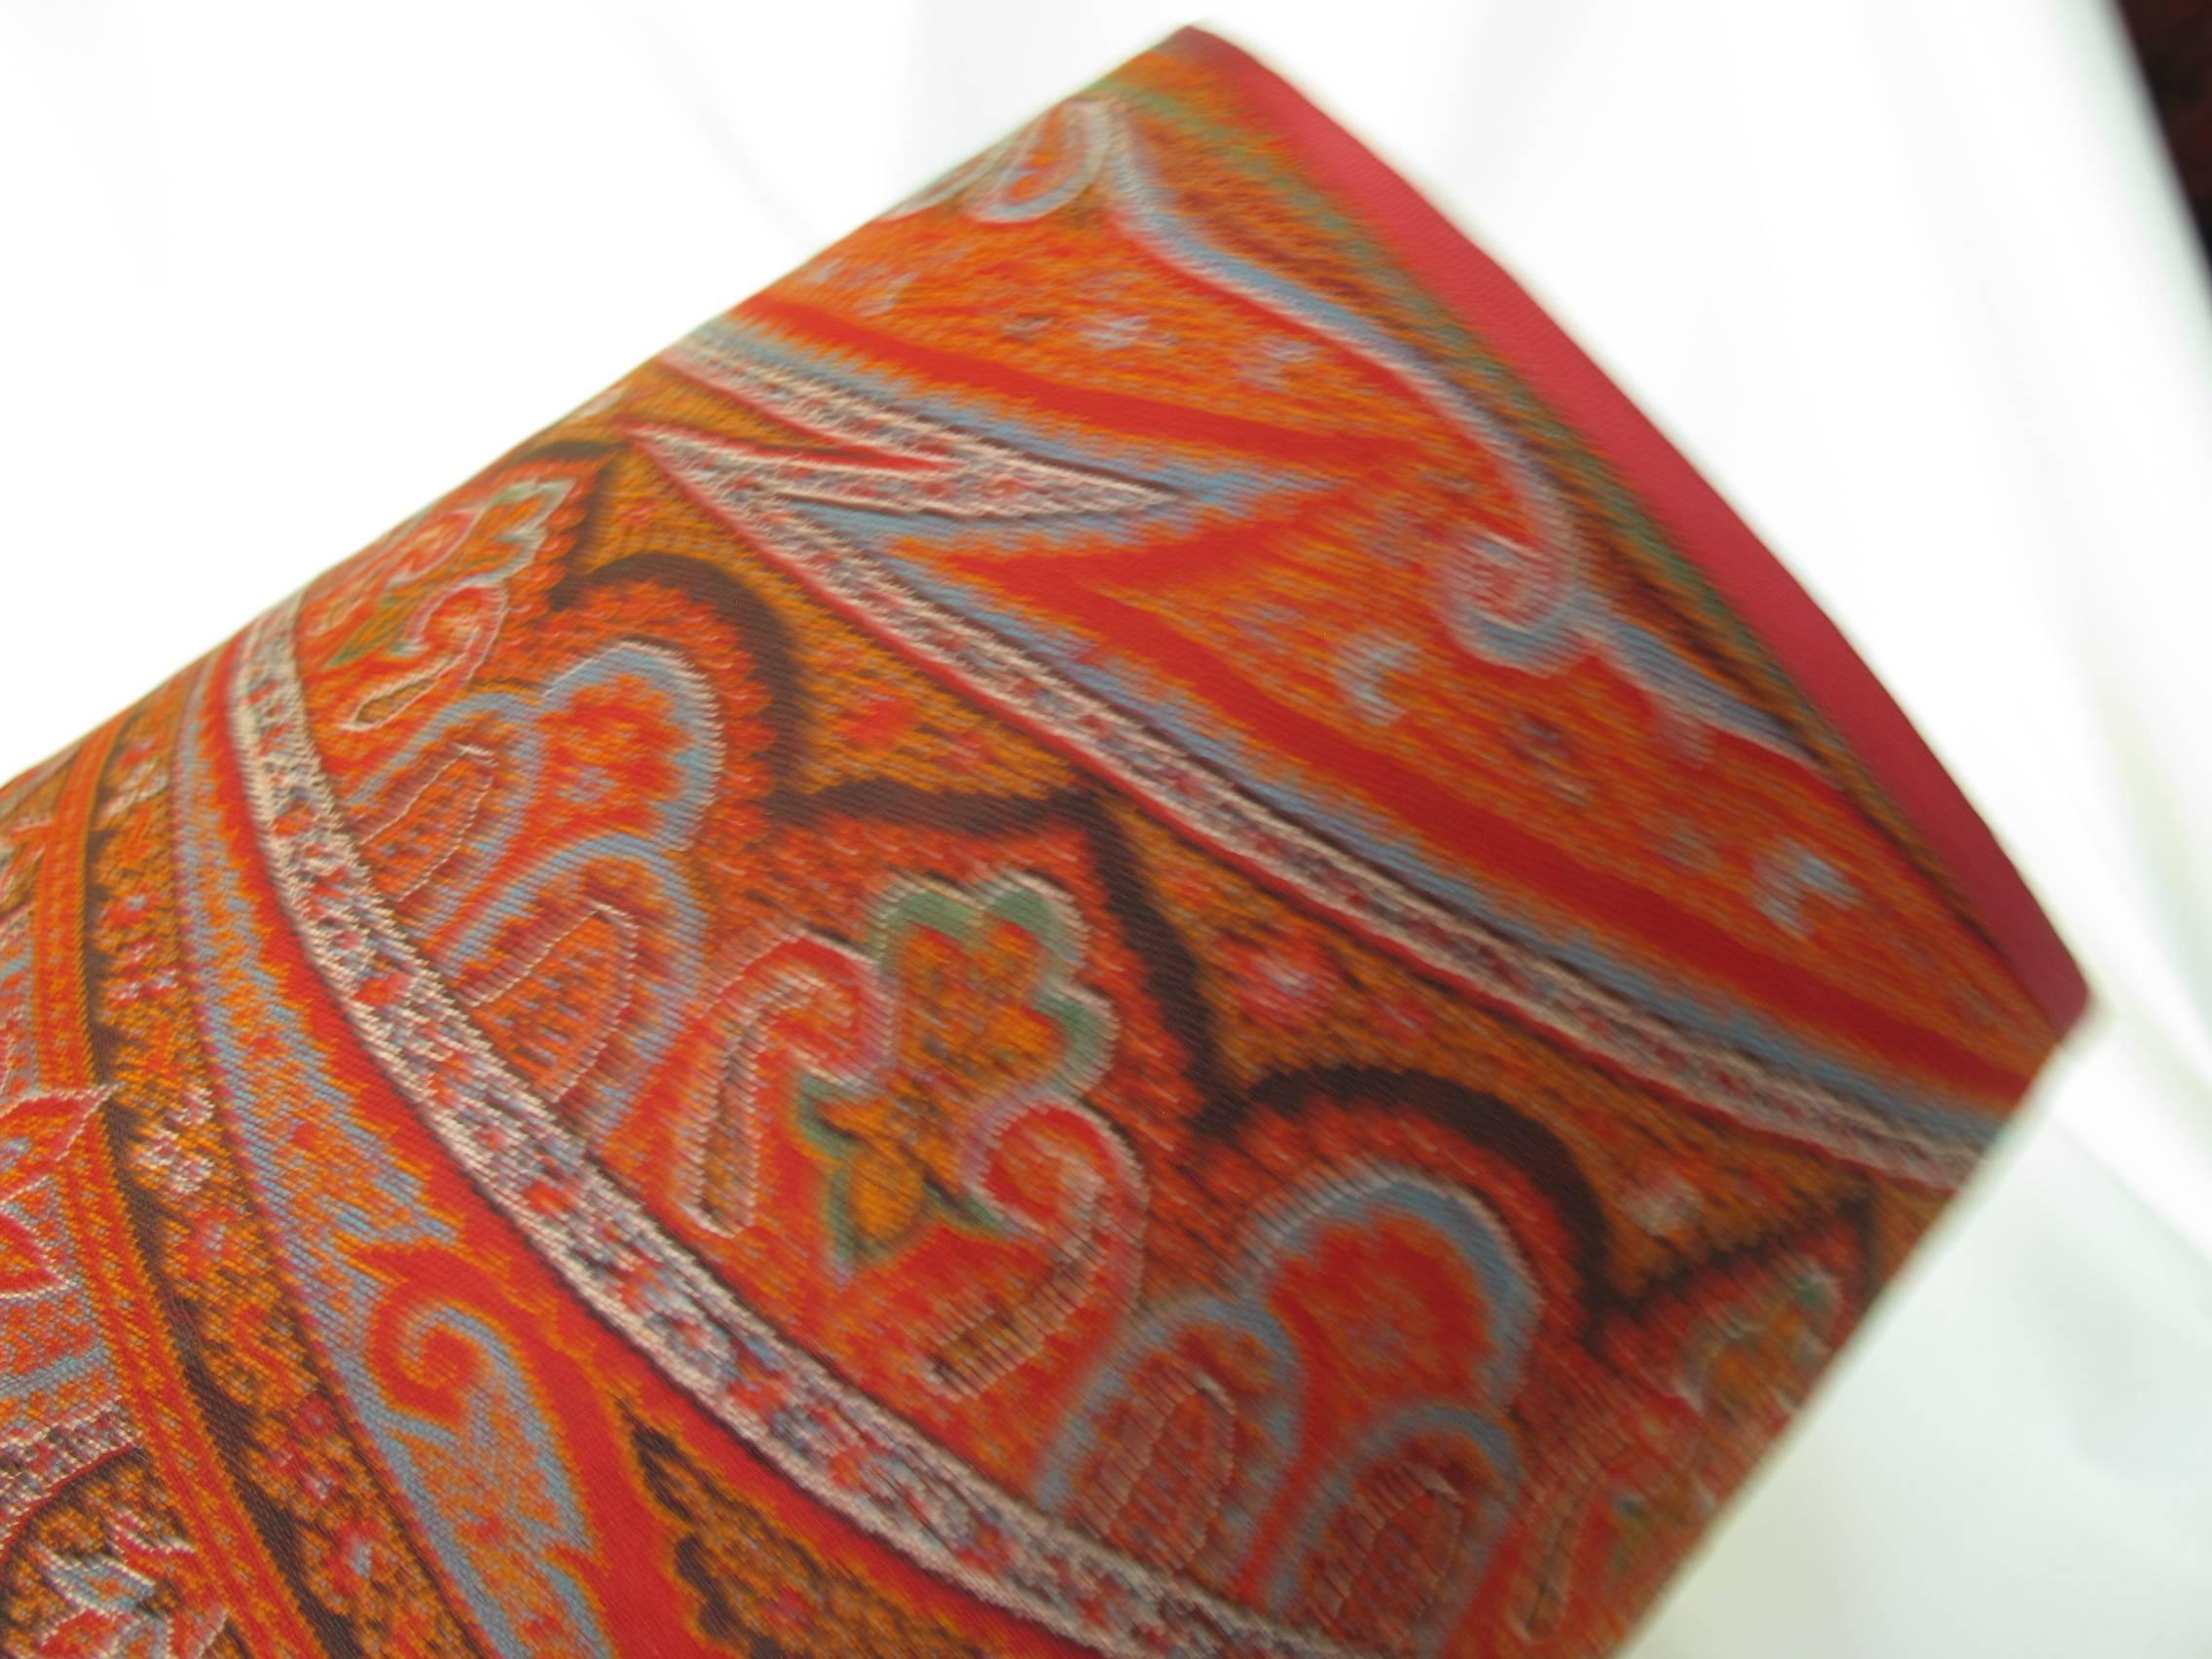 
A pair of lampshades handmade from a circa 1860s Scottish wool hand-loomed paisley shawl. With warm shades of red, orange and a touch of blue.
Measures: Top 9